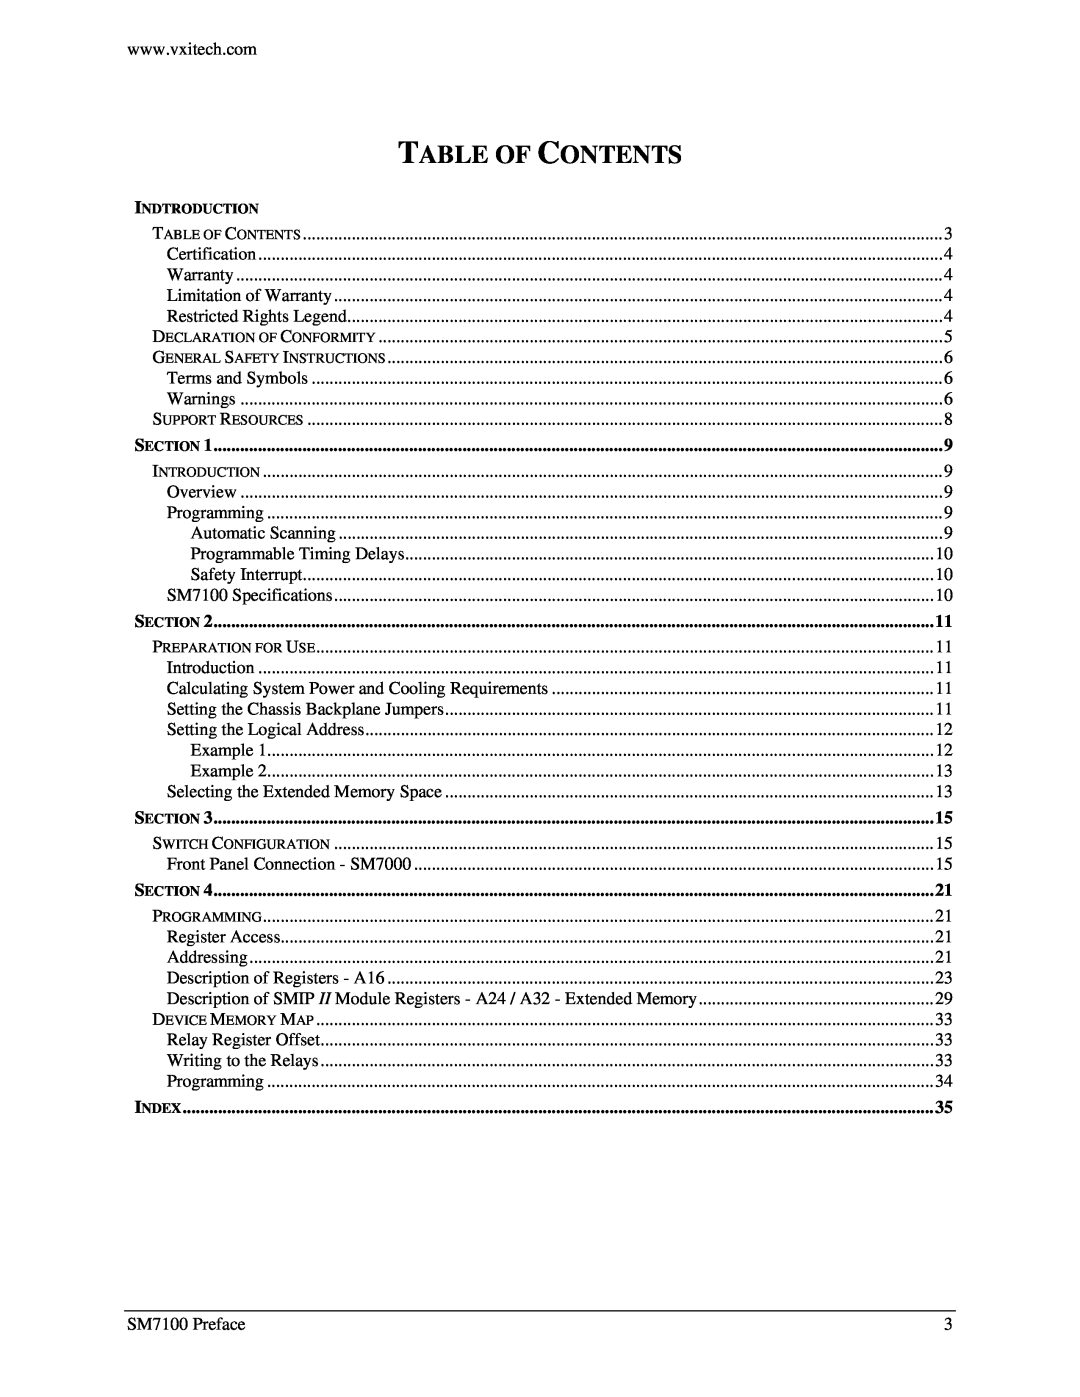 VXI SM7100, Microwave Matrix user manual Table Of Contents, Section, Index 